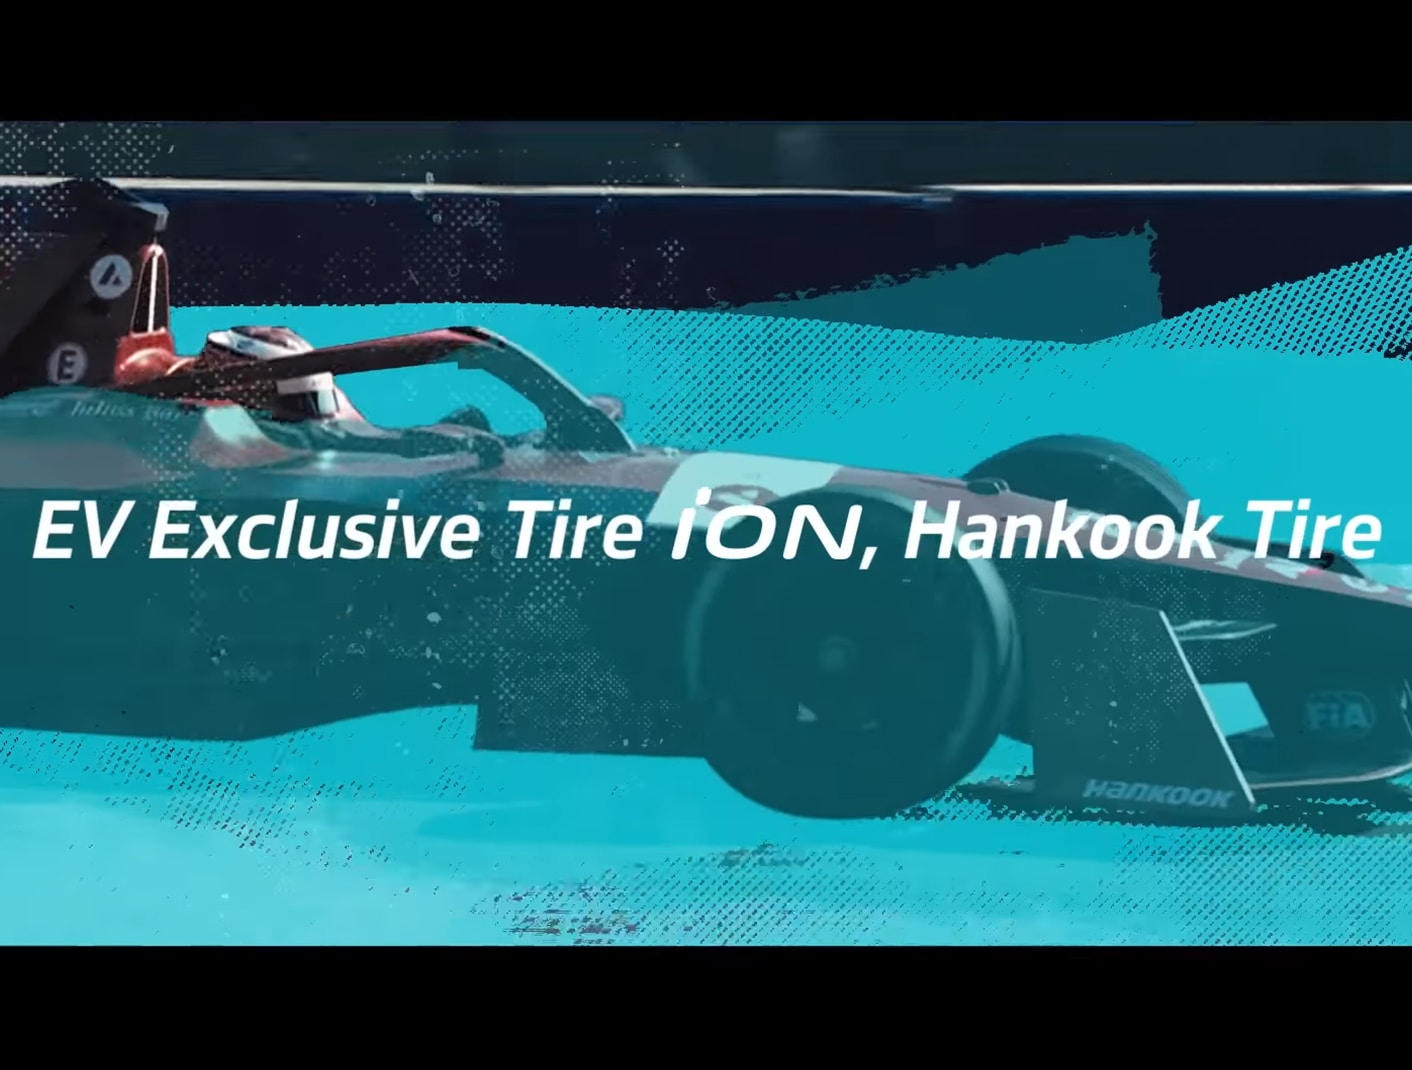 [Hankook Tire] Hankook Tire X Formula E, Electrify Your Driving Emotion_iON ver. (15s)